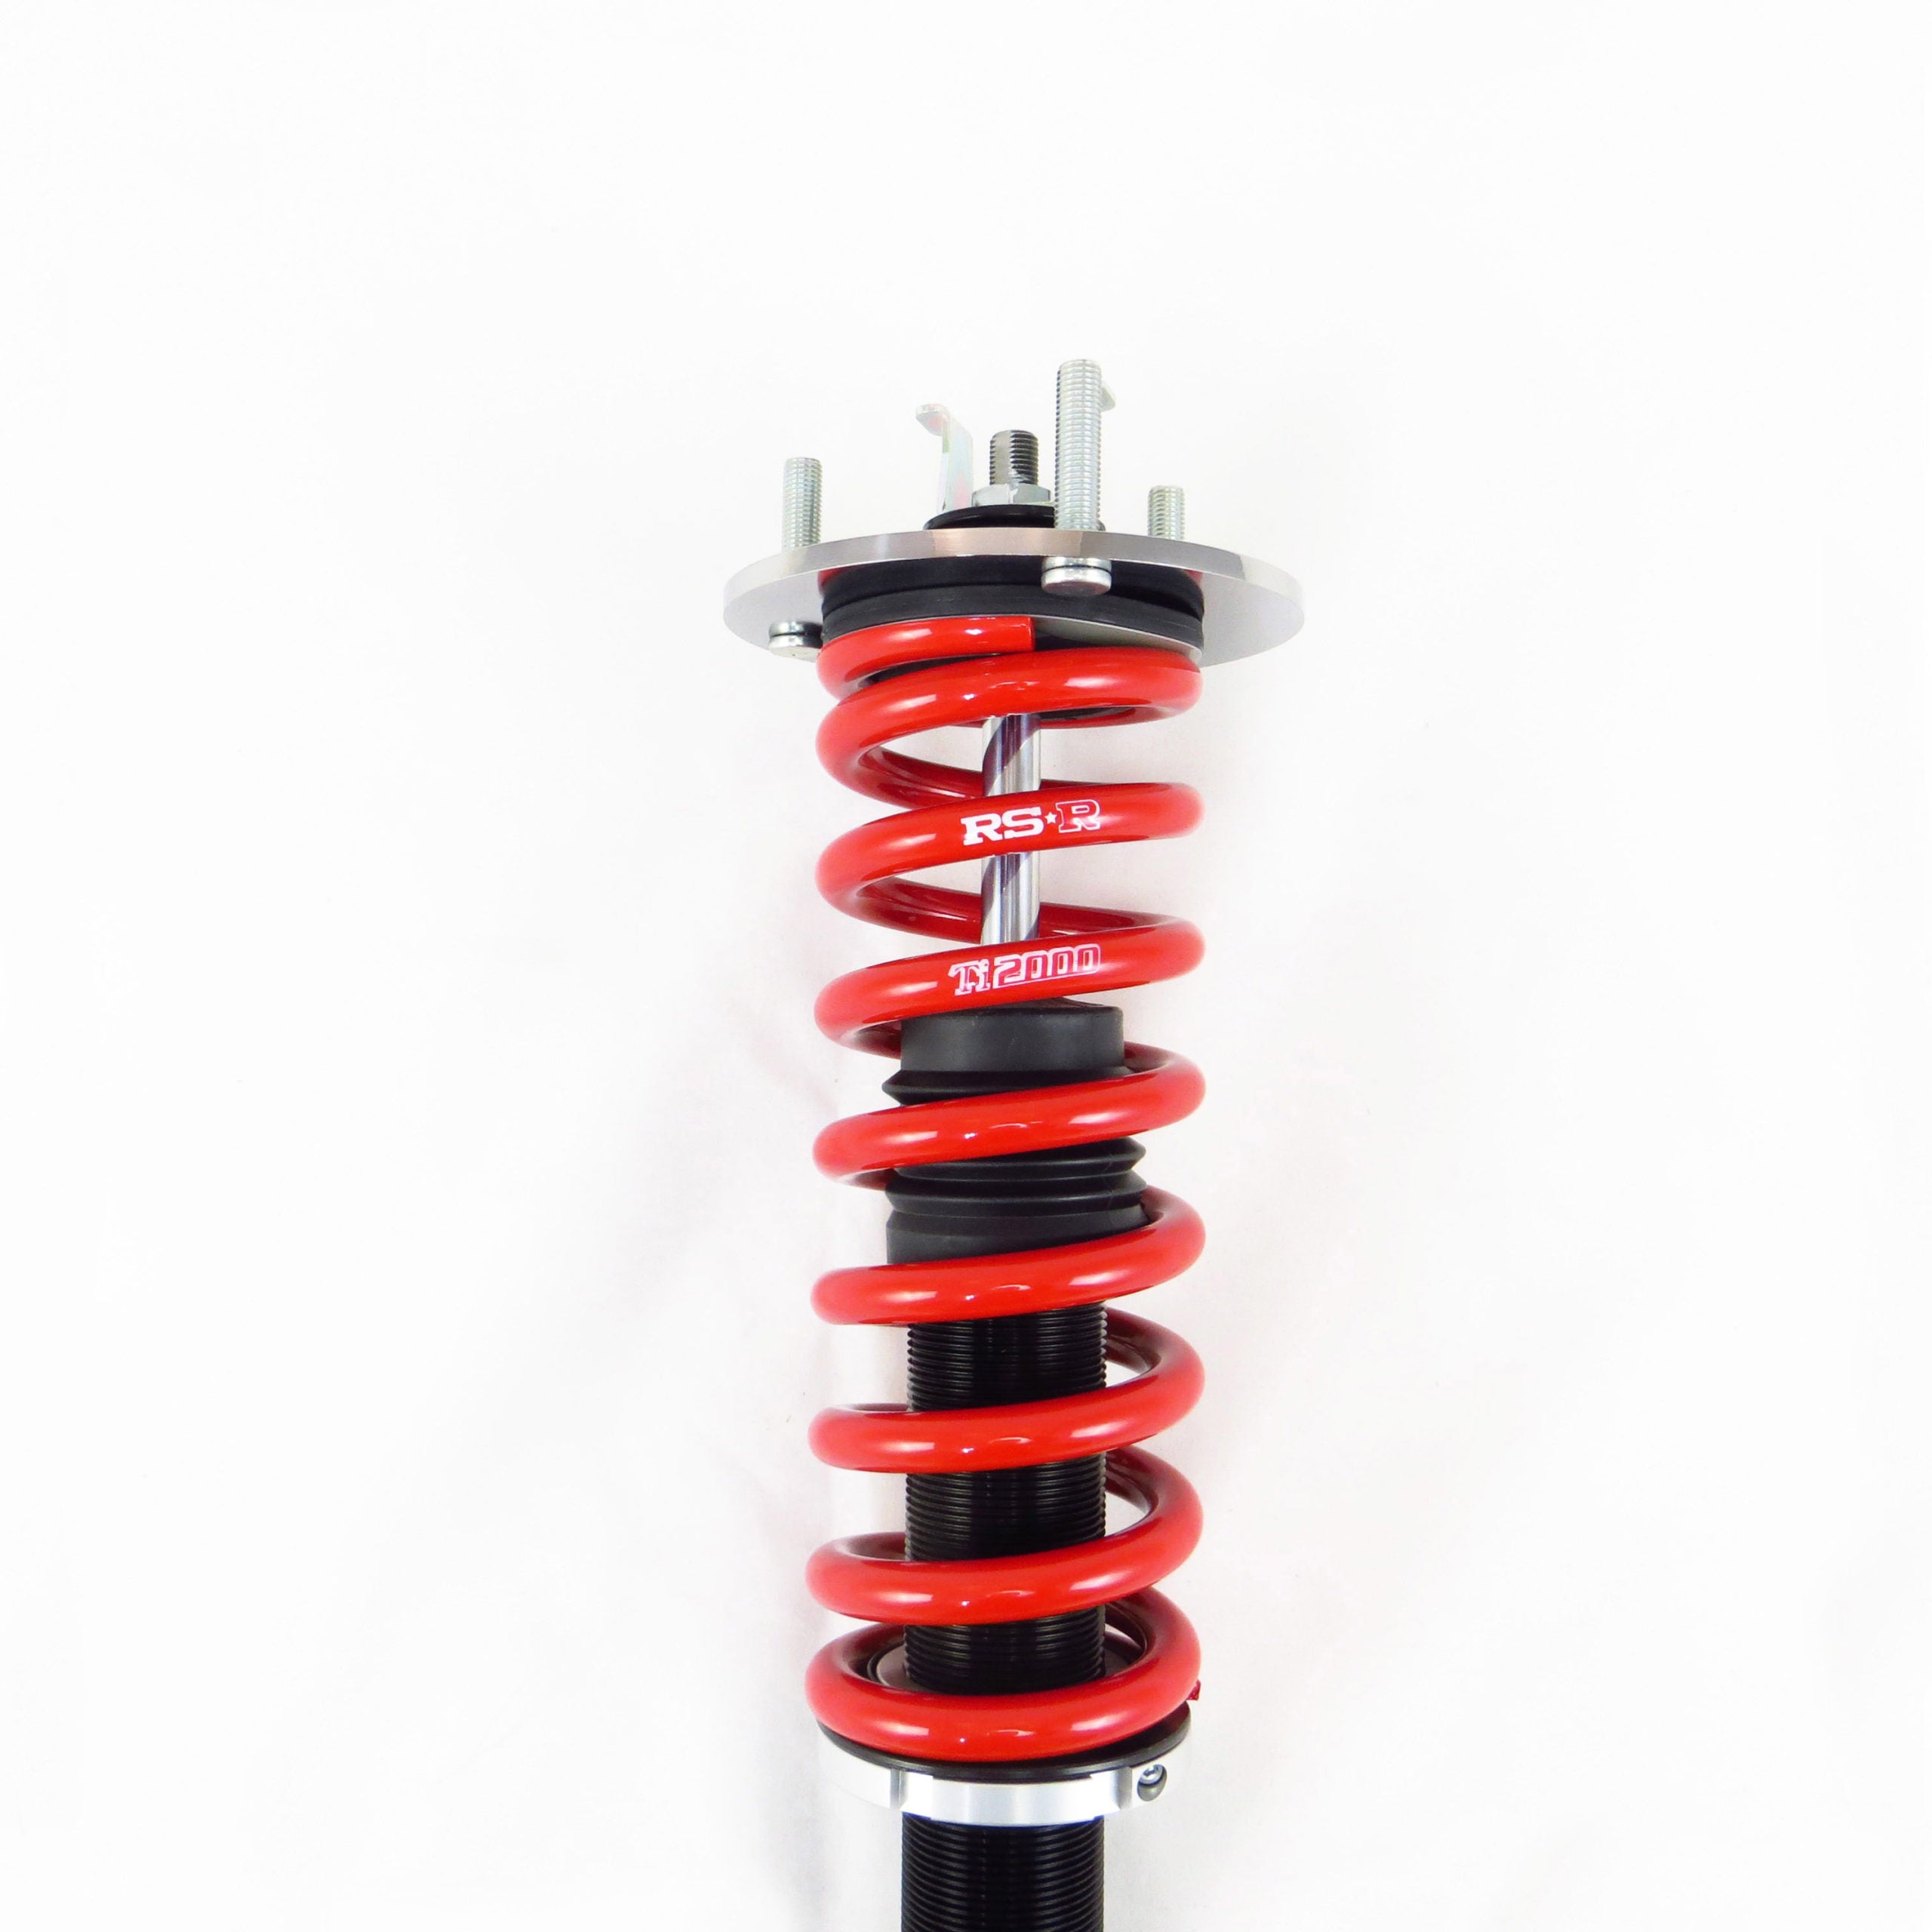 RS-R BEST-I ACTIVE COILOVER KIT: 2021 LEXUS IS 350 F SPORT